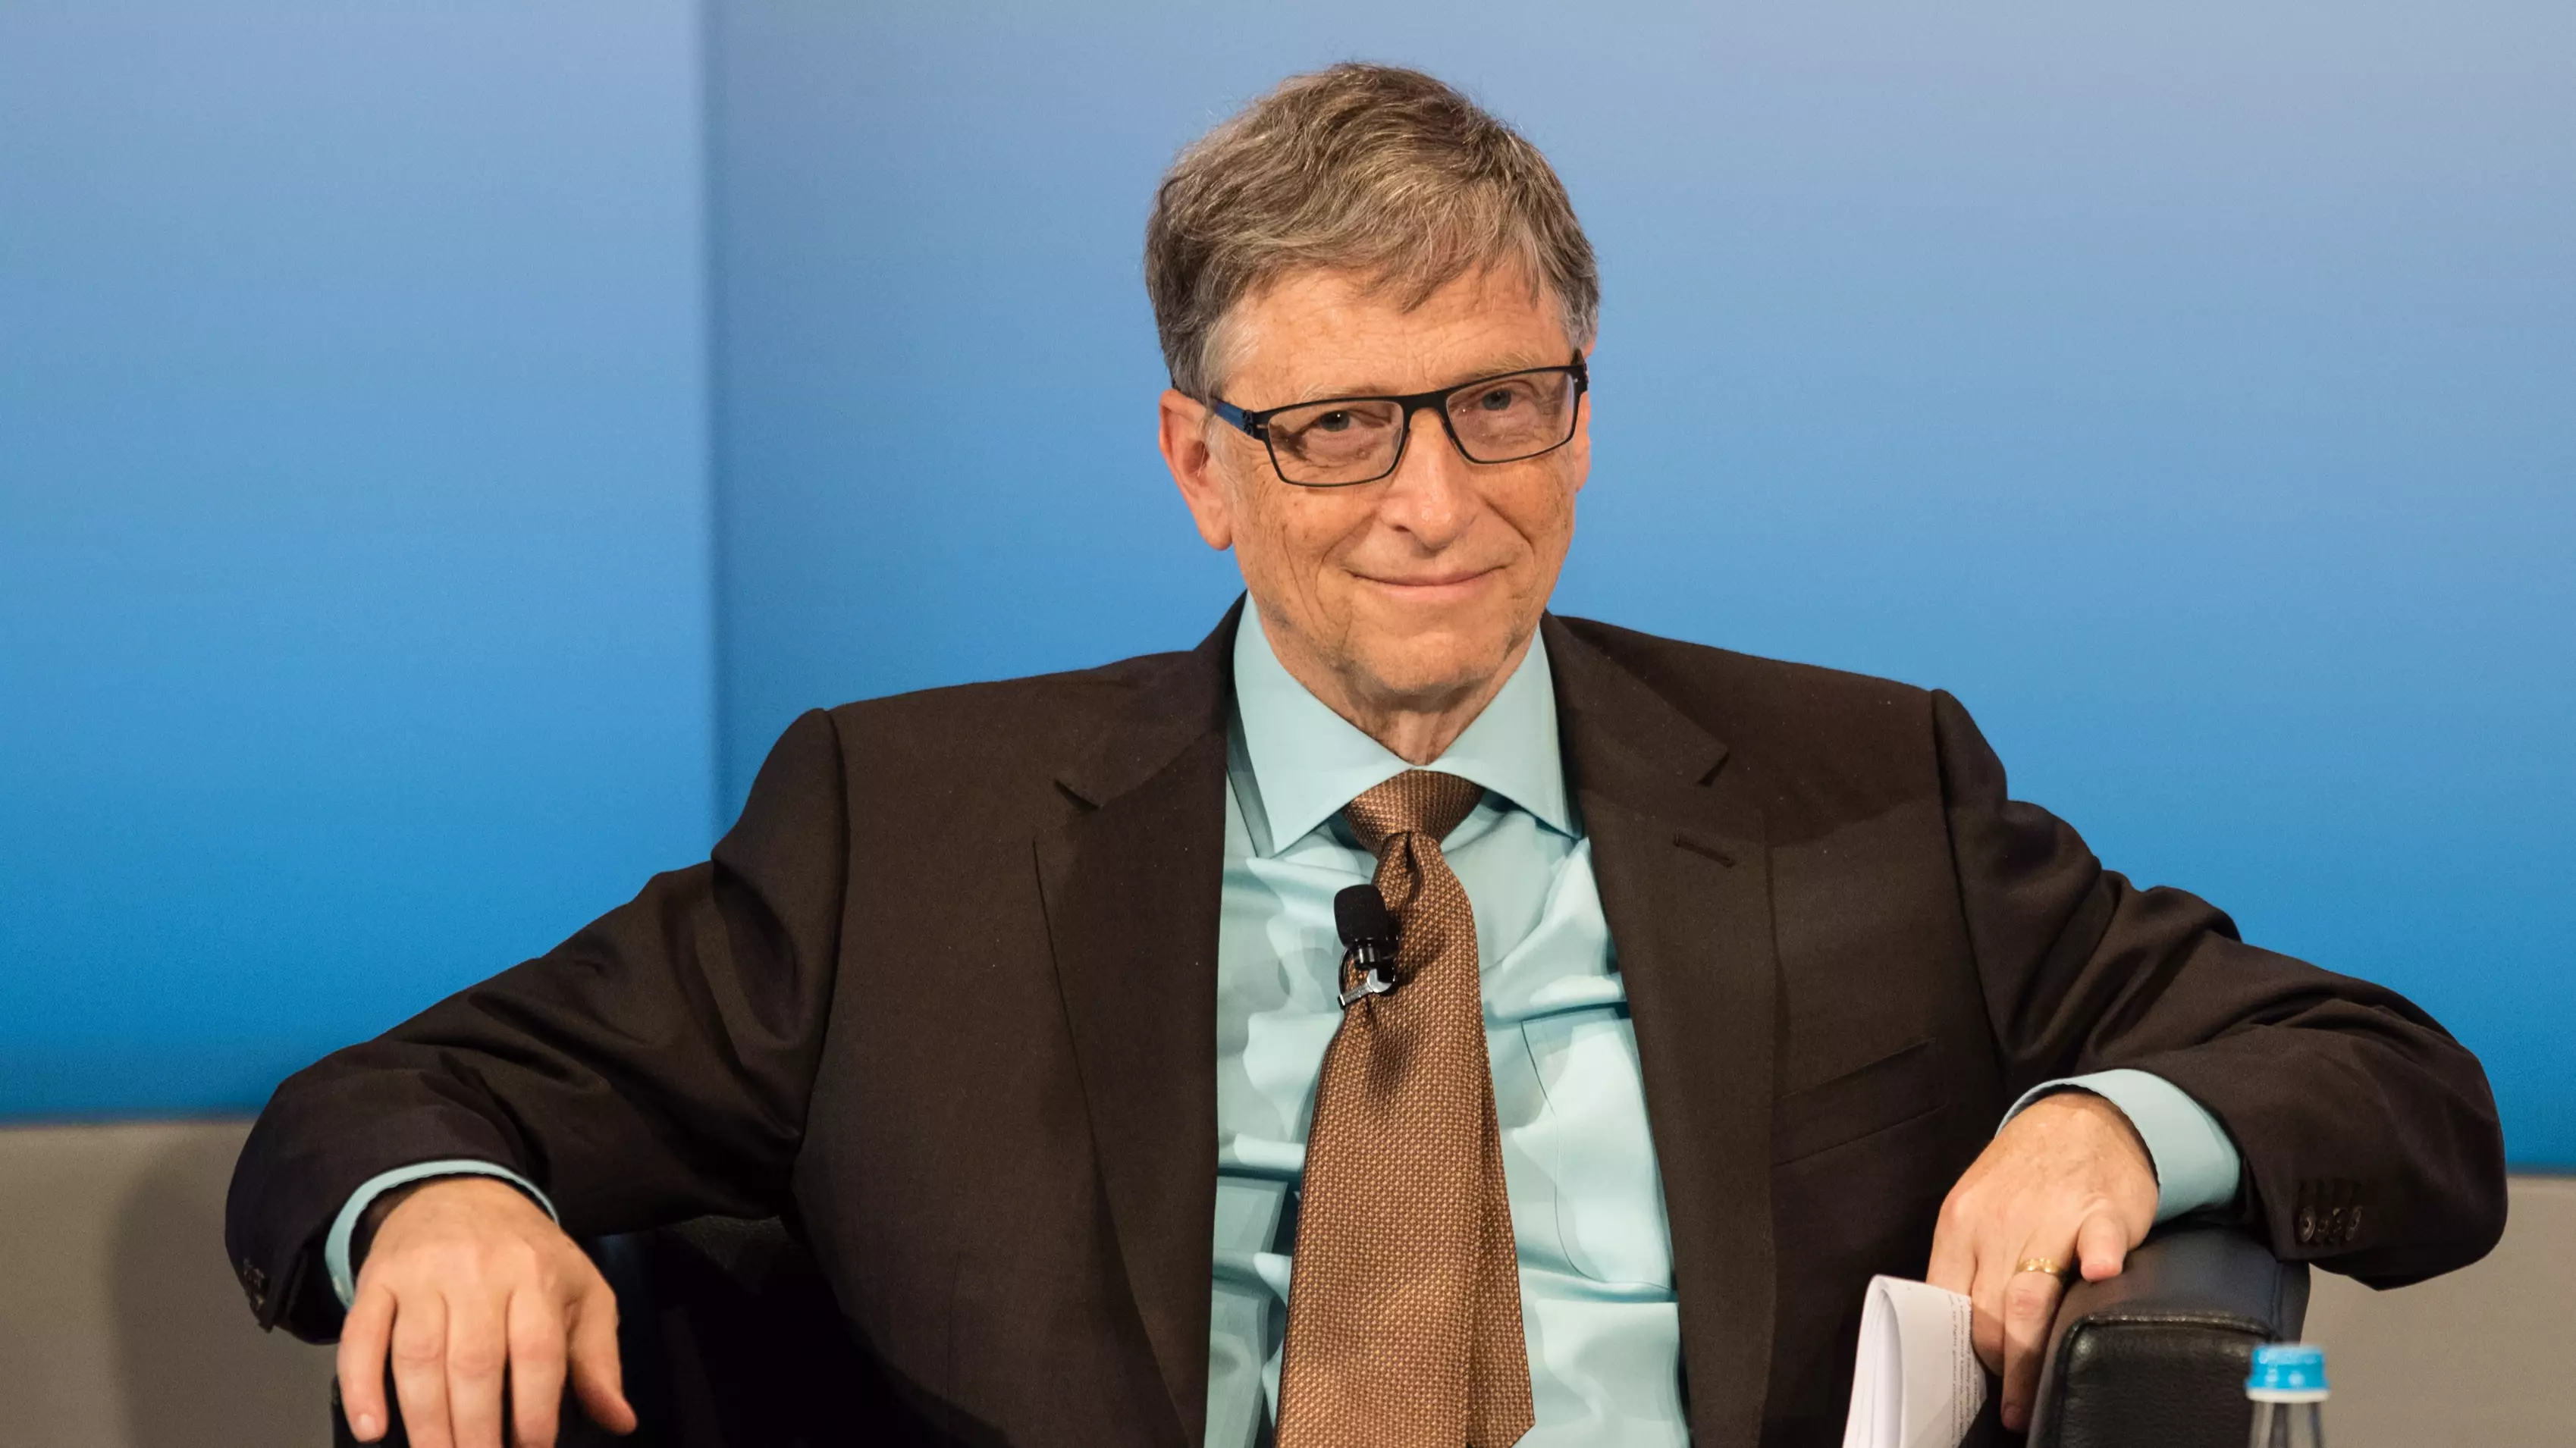 Here’s A Tiny Peek Inside Bill Gates’ Daily Routine 